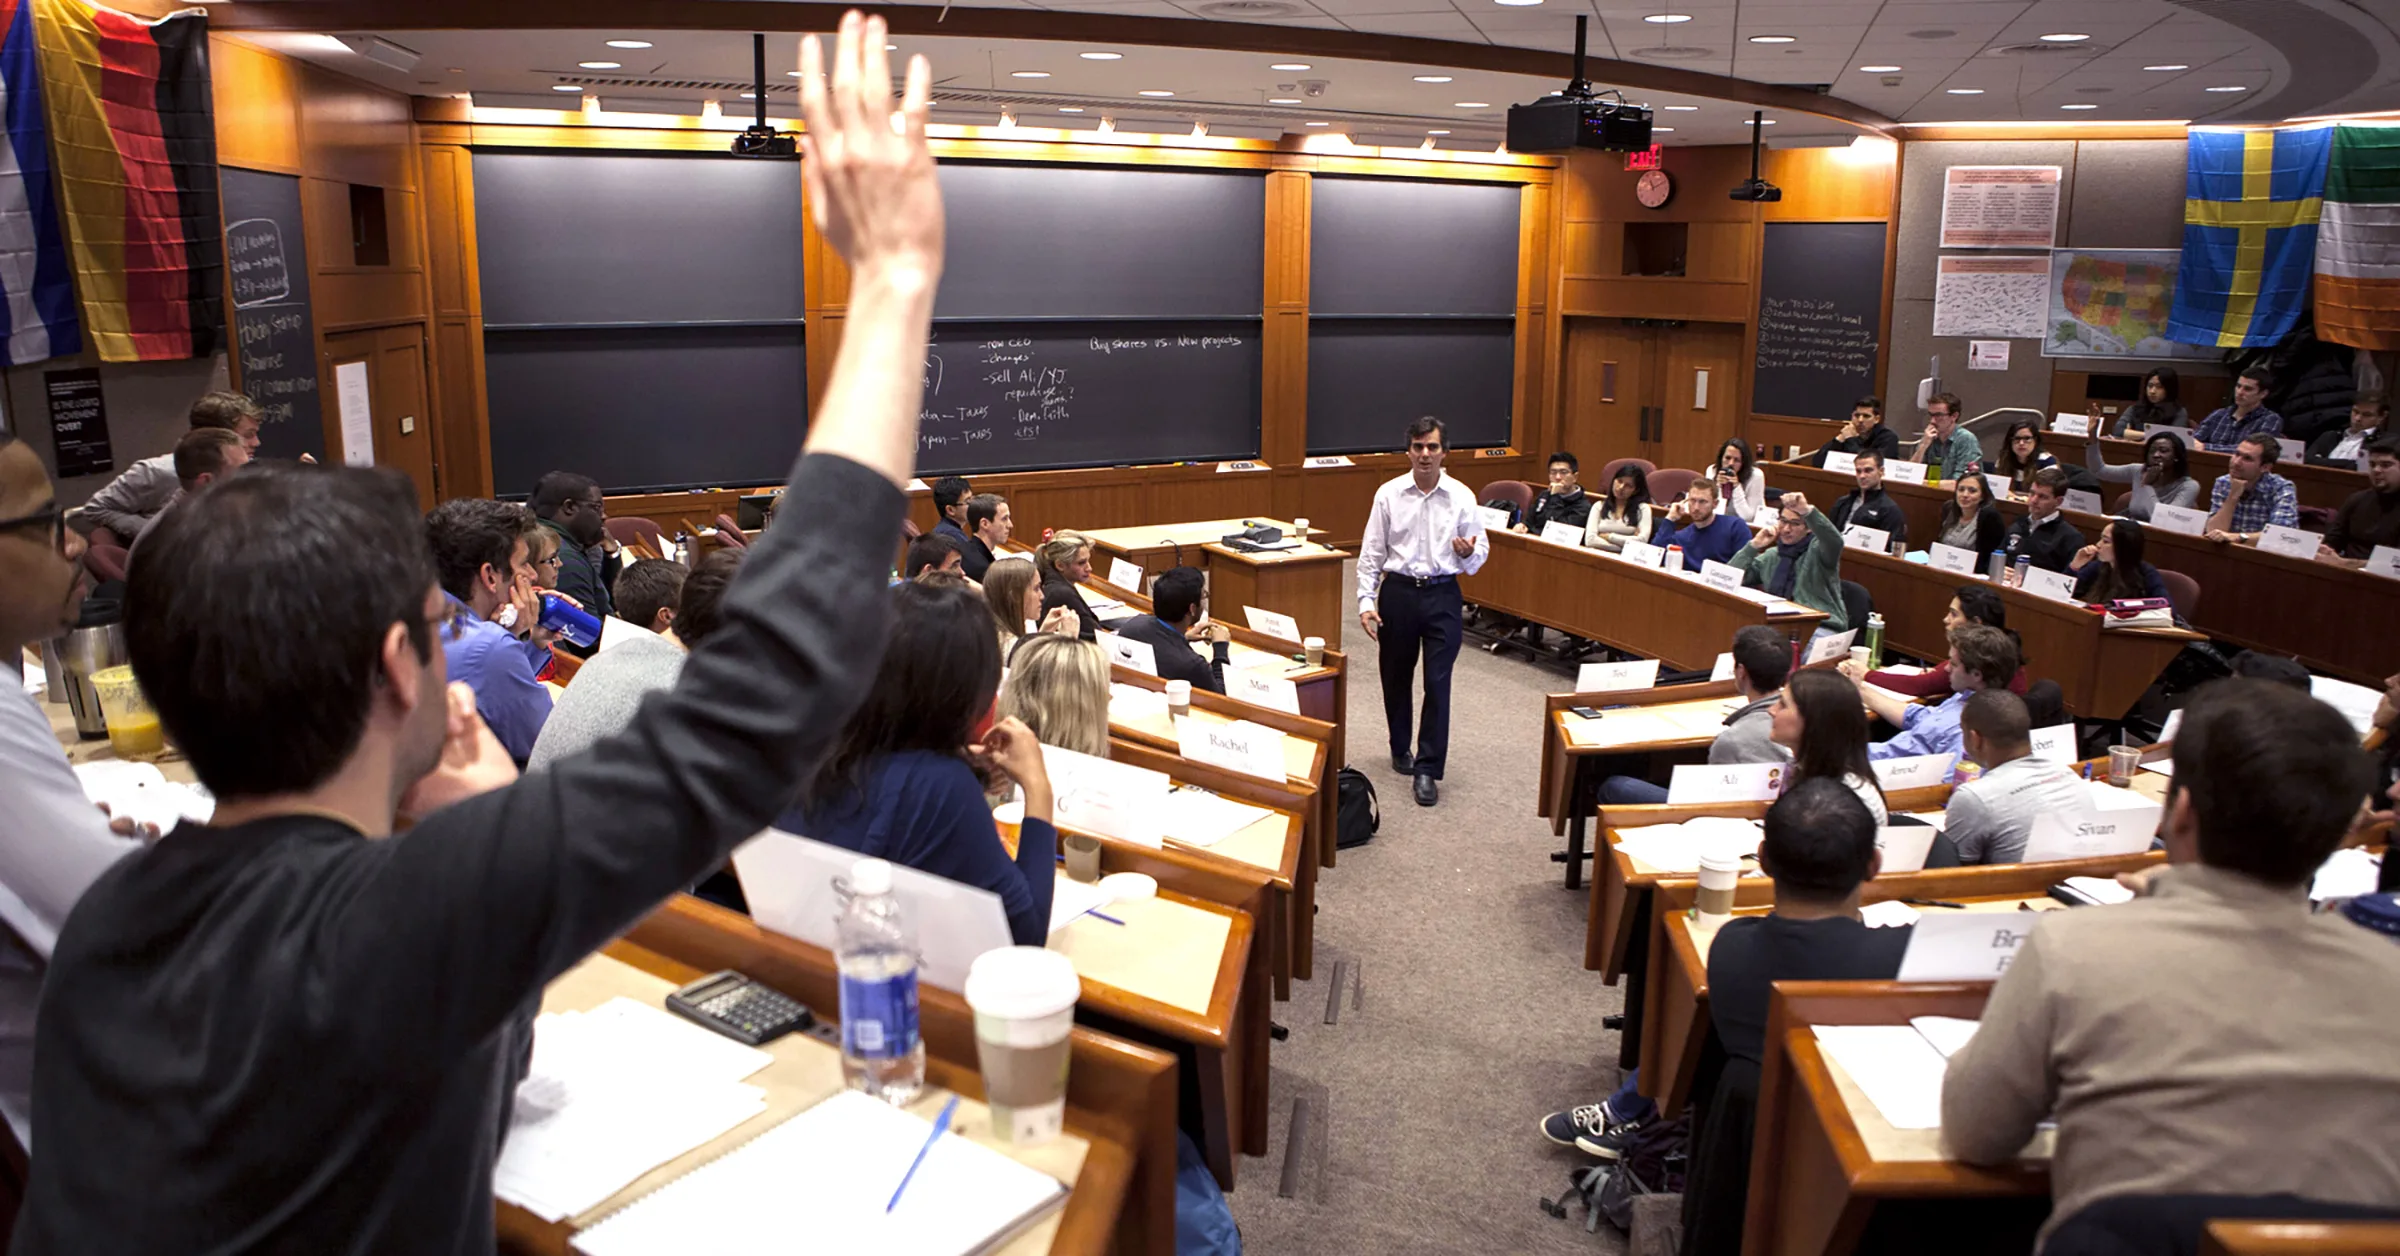 MBA students raising hands in classroom during a case discussion